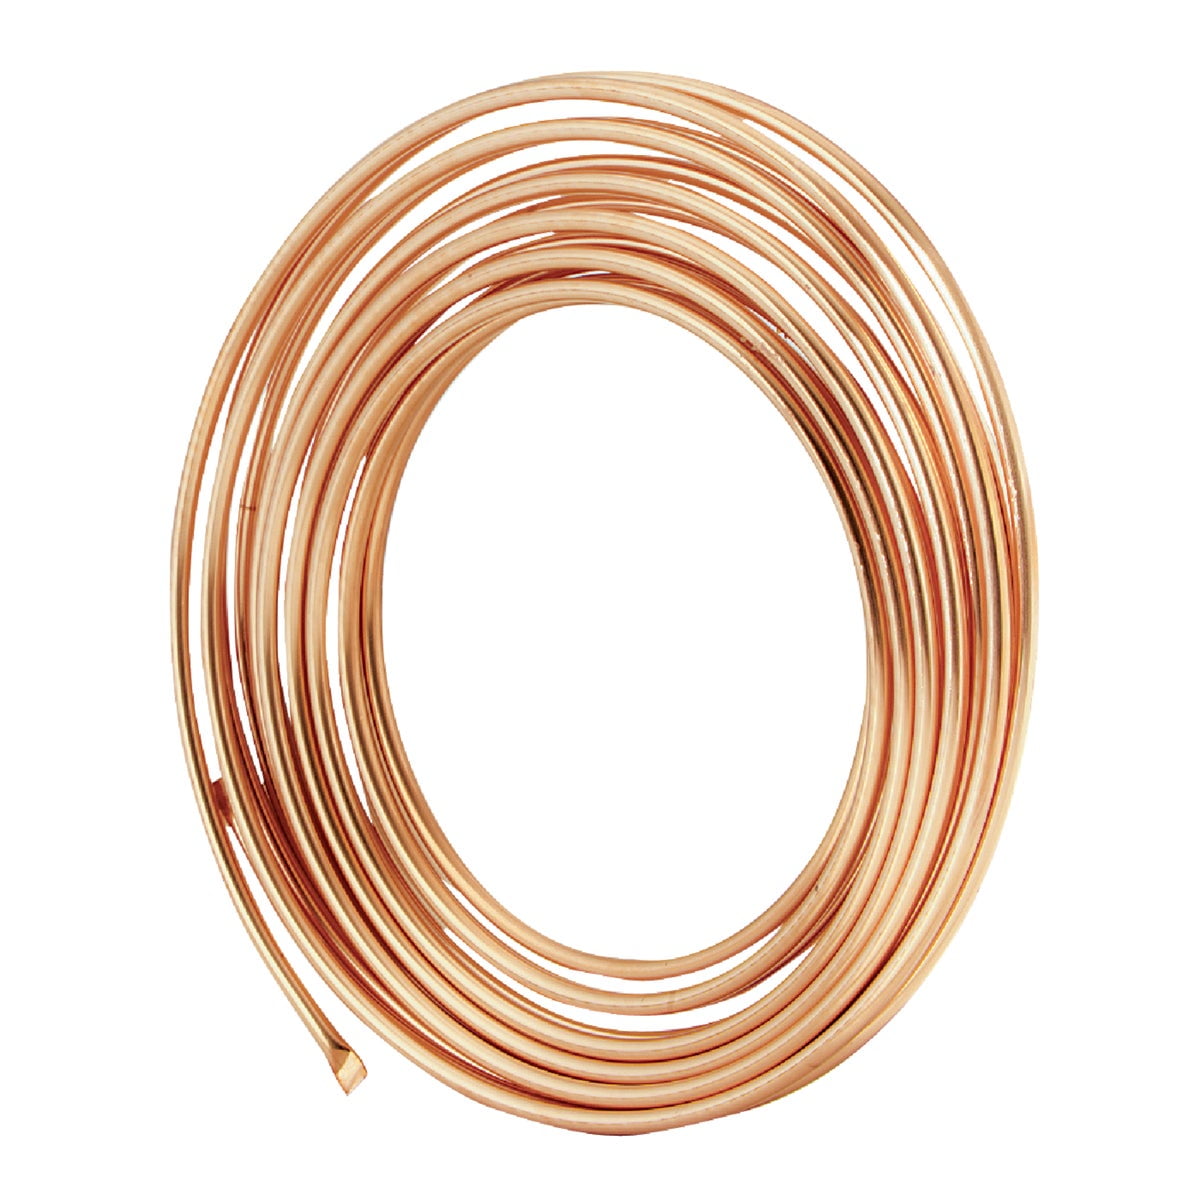 Copper Tube Pipe Tubing Fuel Oil Line Plastic Coated High Grade 3/8" OD x 50 ft 